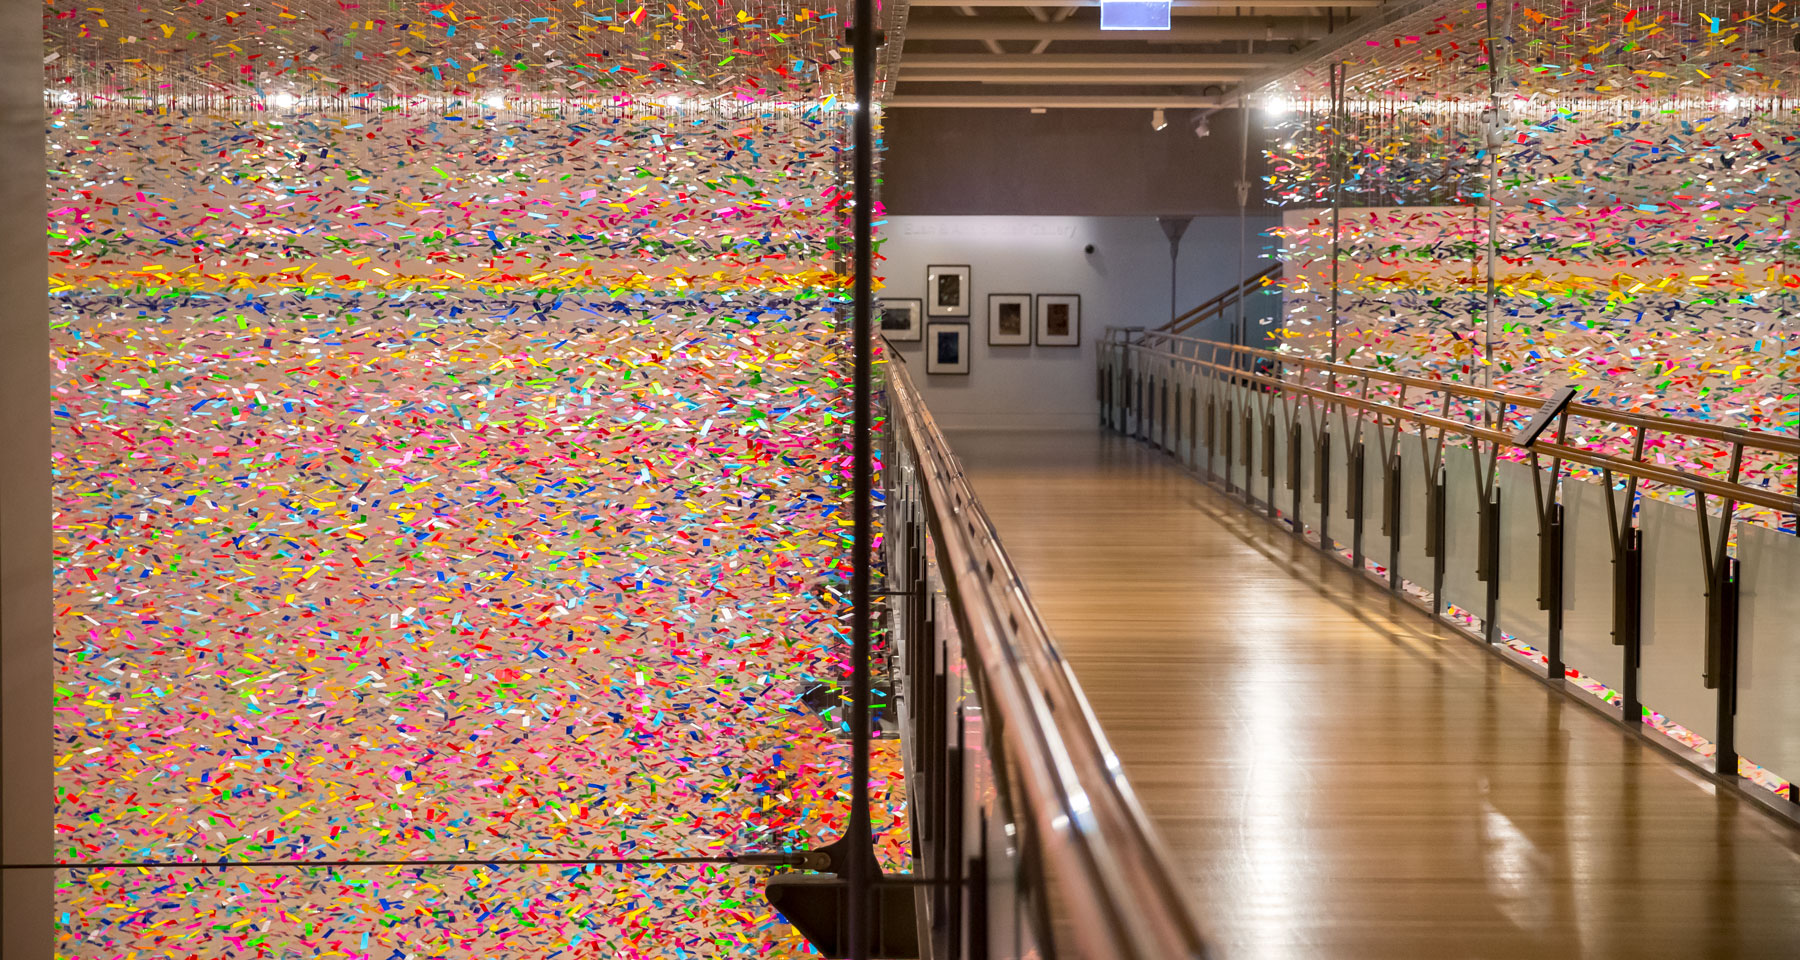 Installation shot of the colourful artwork which looks like confetti filling the whole gallery space